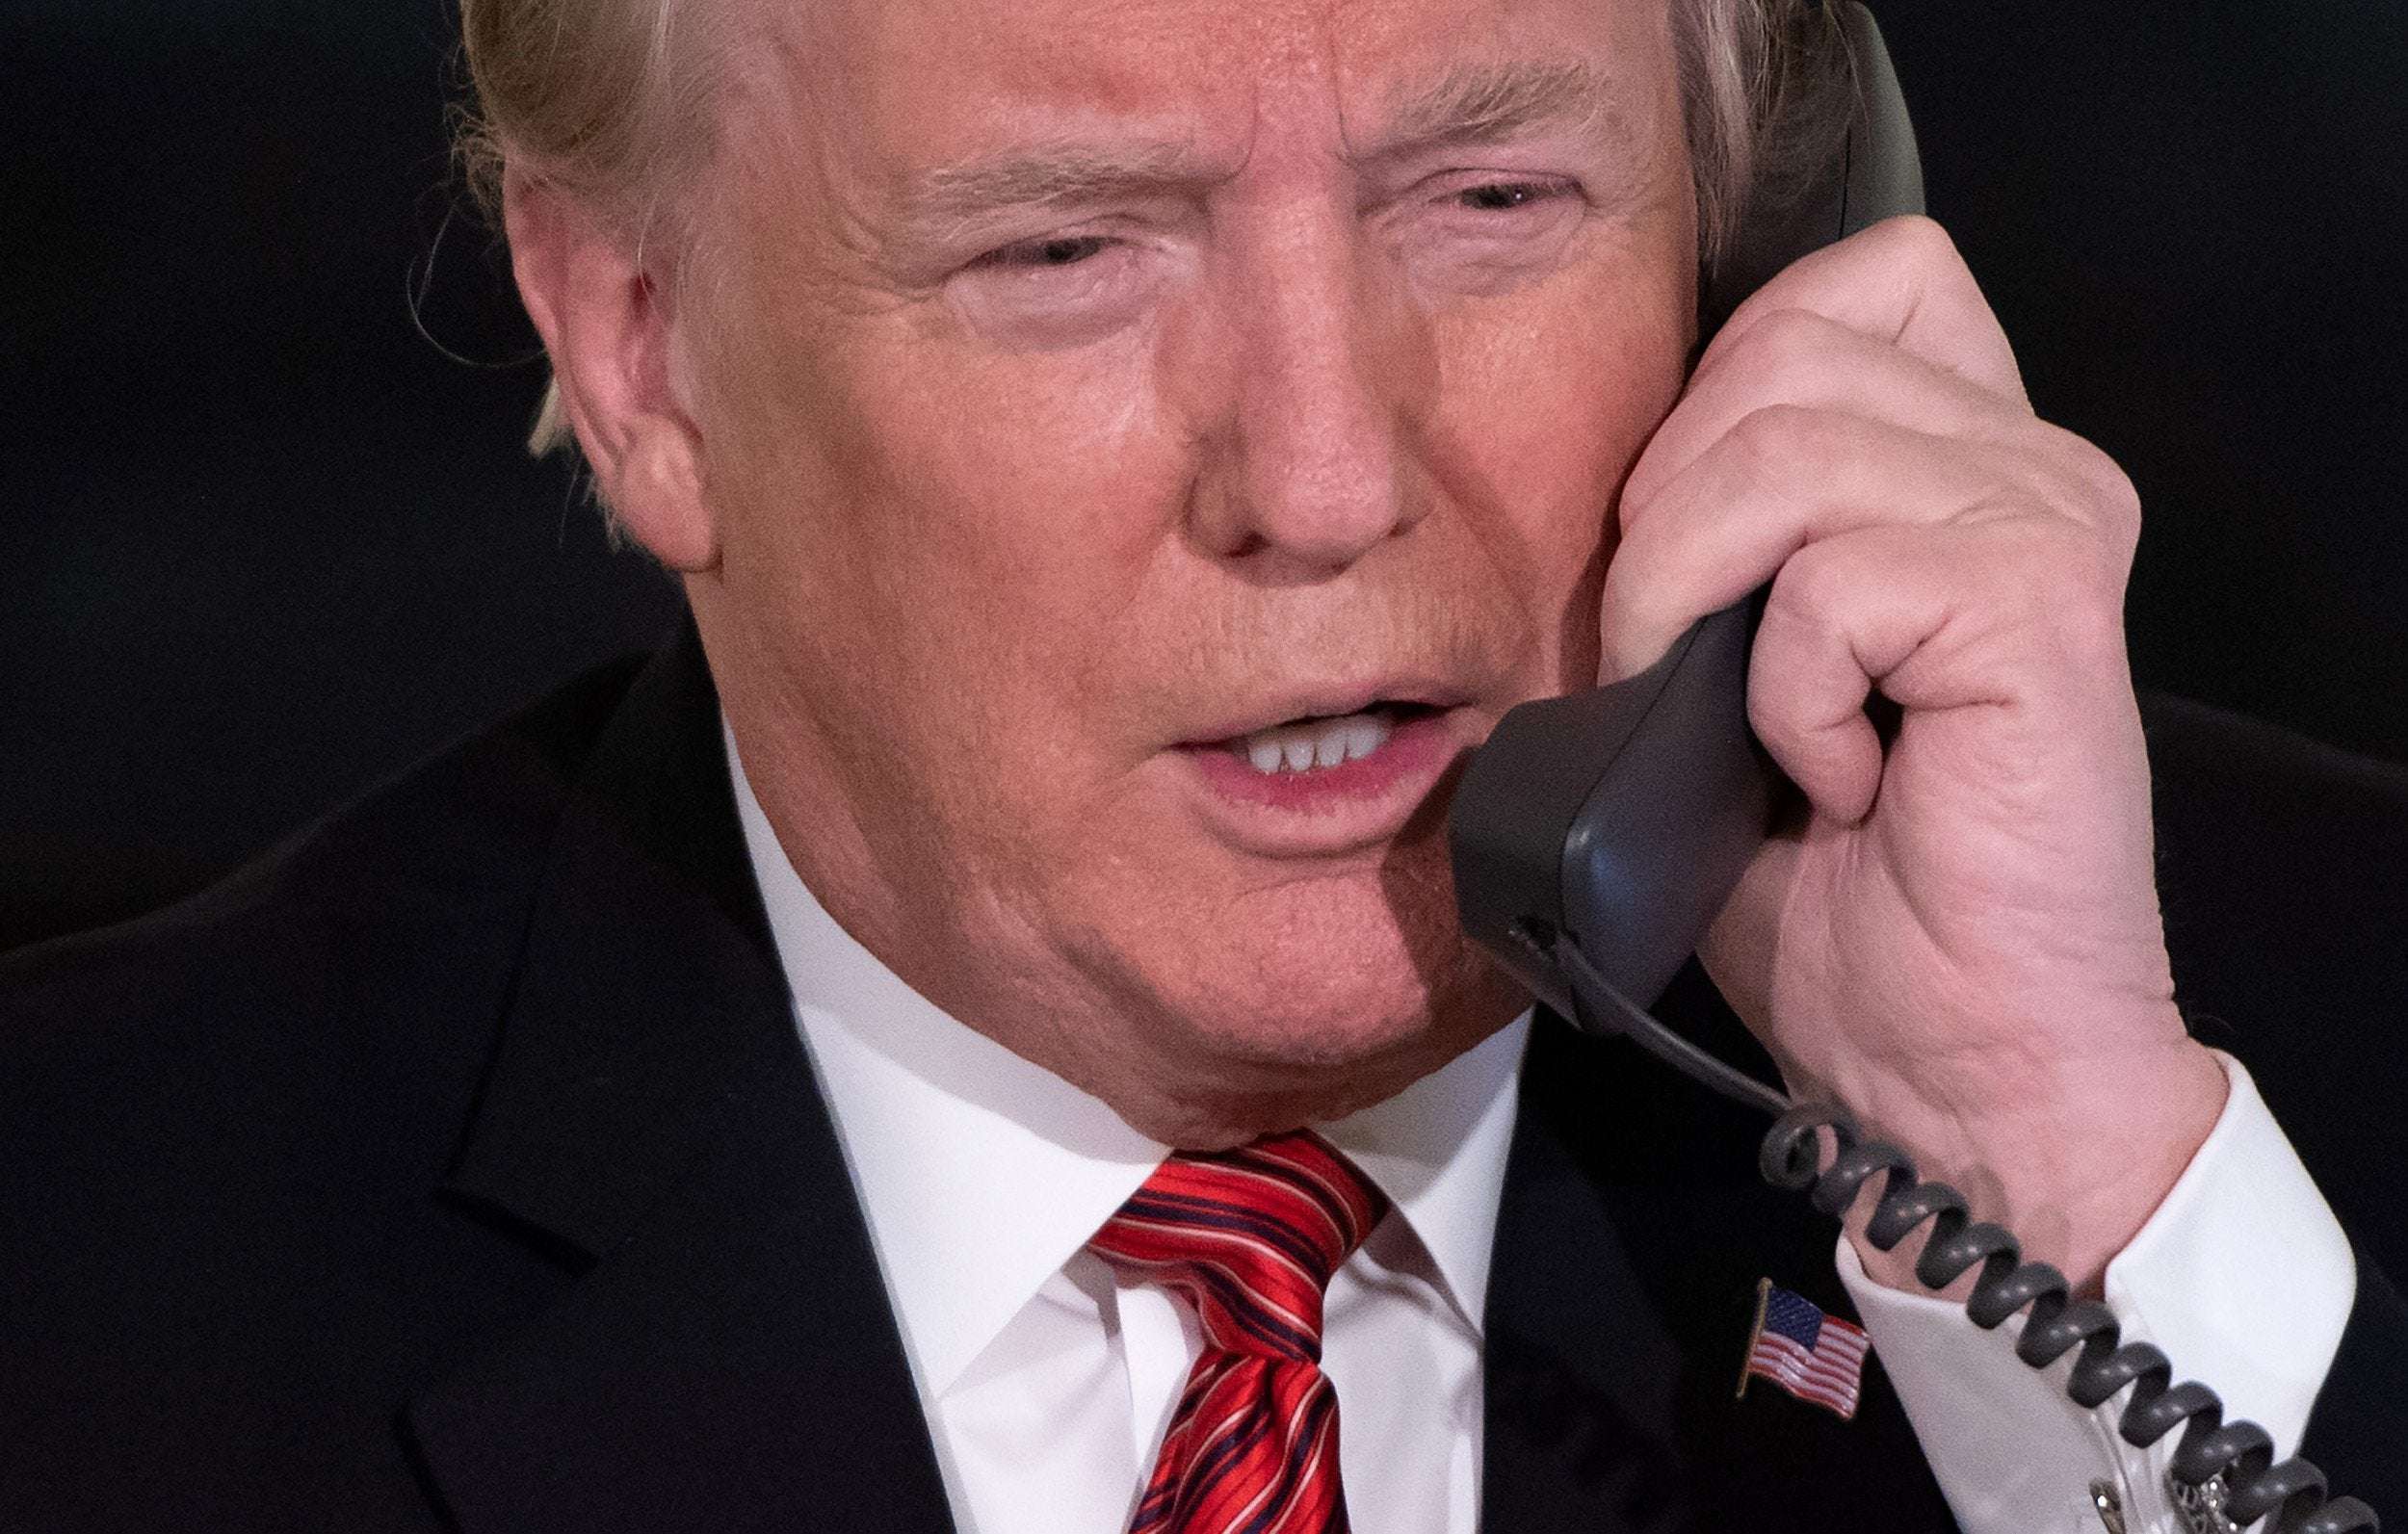 image for Trump 'Fawning' to Putin and other Authoritarians in 'Embarrassing' Phone Calls, White House Aides Say—Report